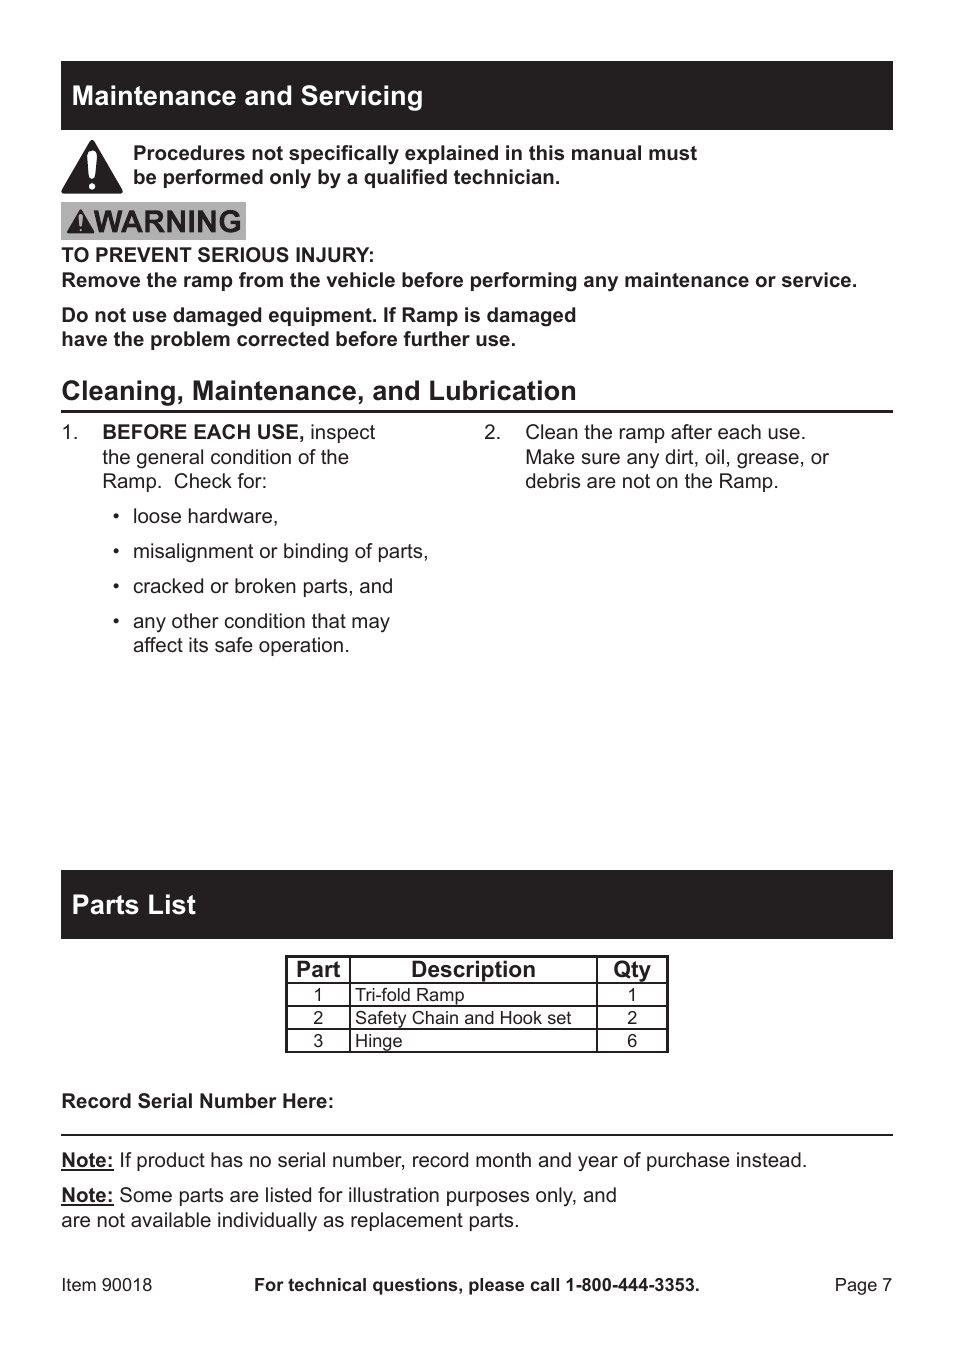 Parts list, Maintenance and servicing, Cleaning, maintenance, and lubrication | Zweita  Co Haul Master Tri-Fold Aluminum Ram 90018 User Manual | Page 7 / 8